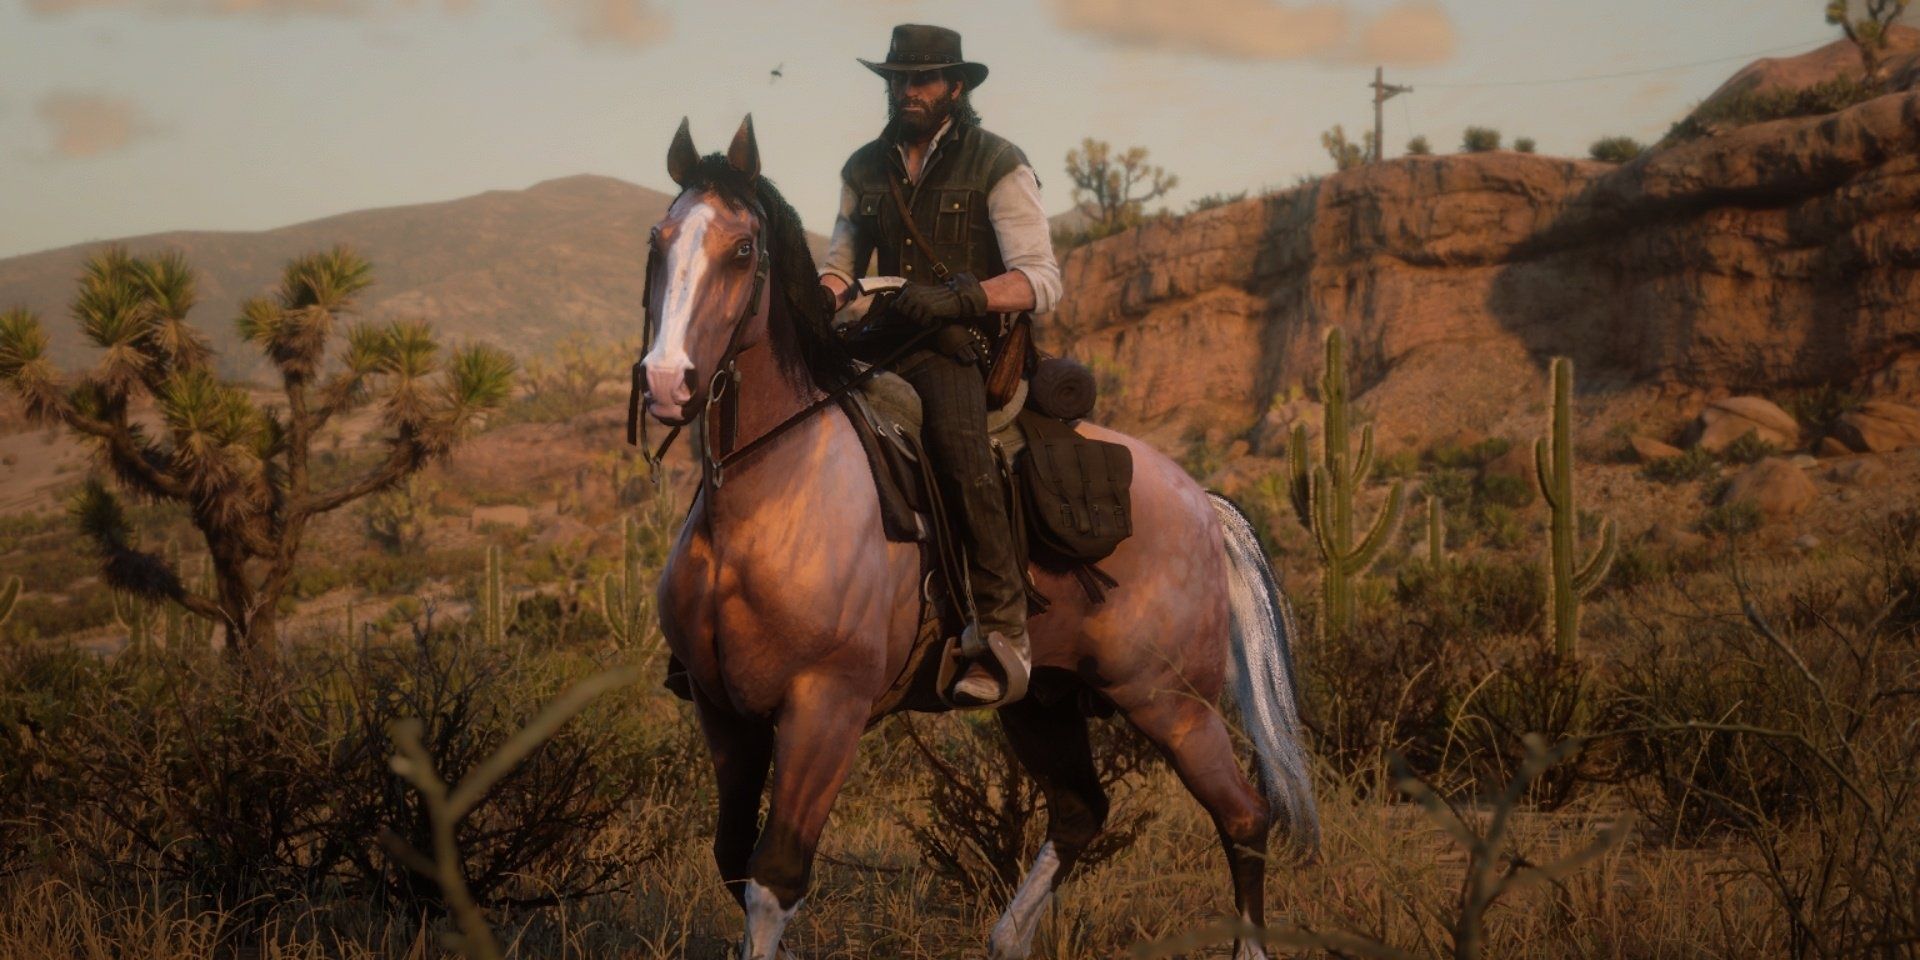 The American Standardbred horse breed in Red Dead Redemption 2